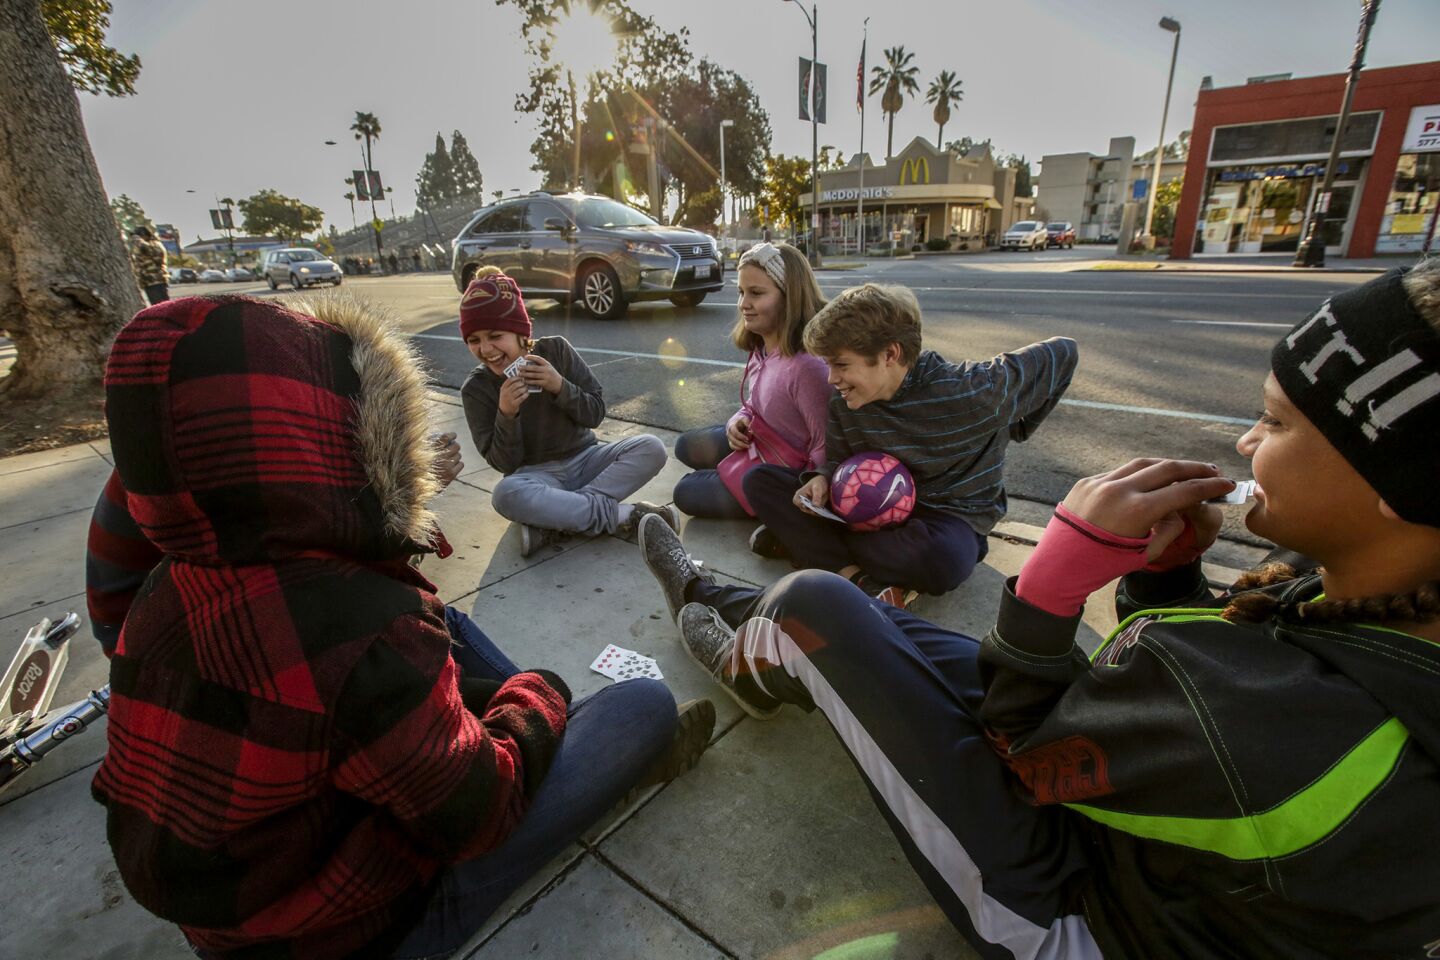 Christianna Watkins, 12, right, from Lake Elsinore, and her friends play a card game sitting along Colorado Boulevard in advance of Friday's parade.